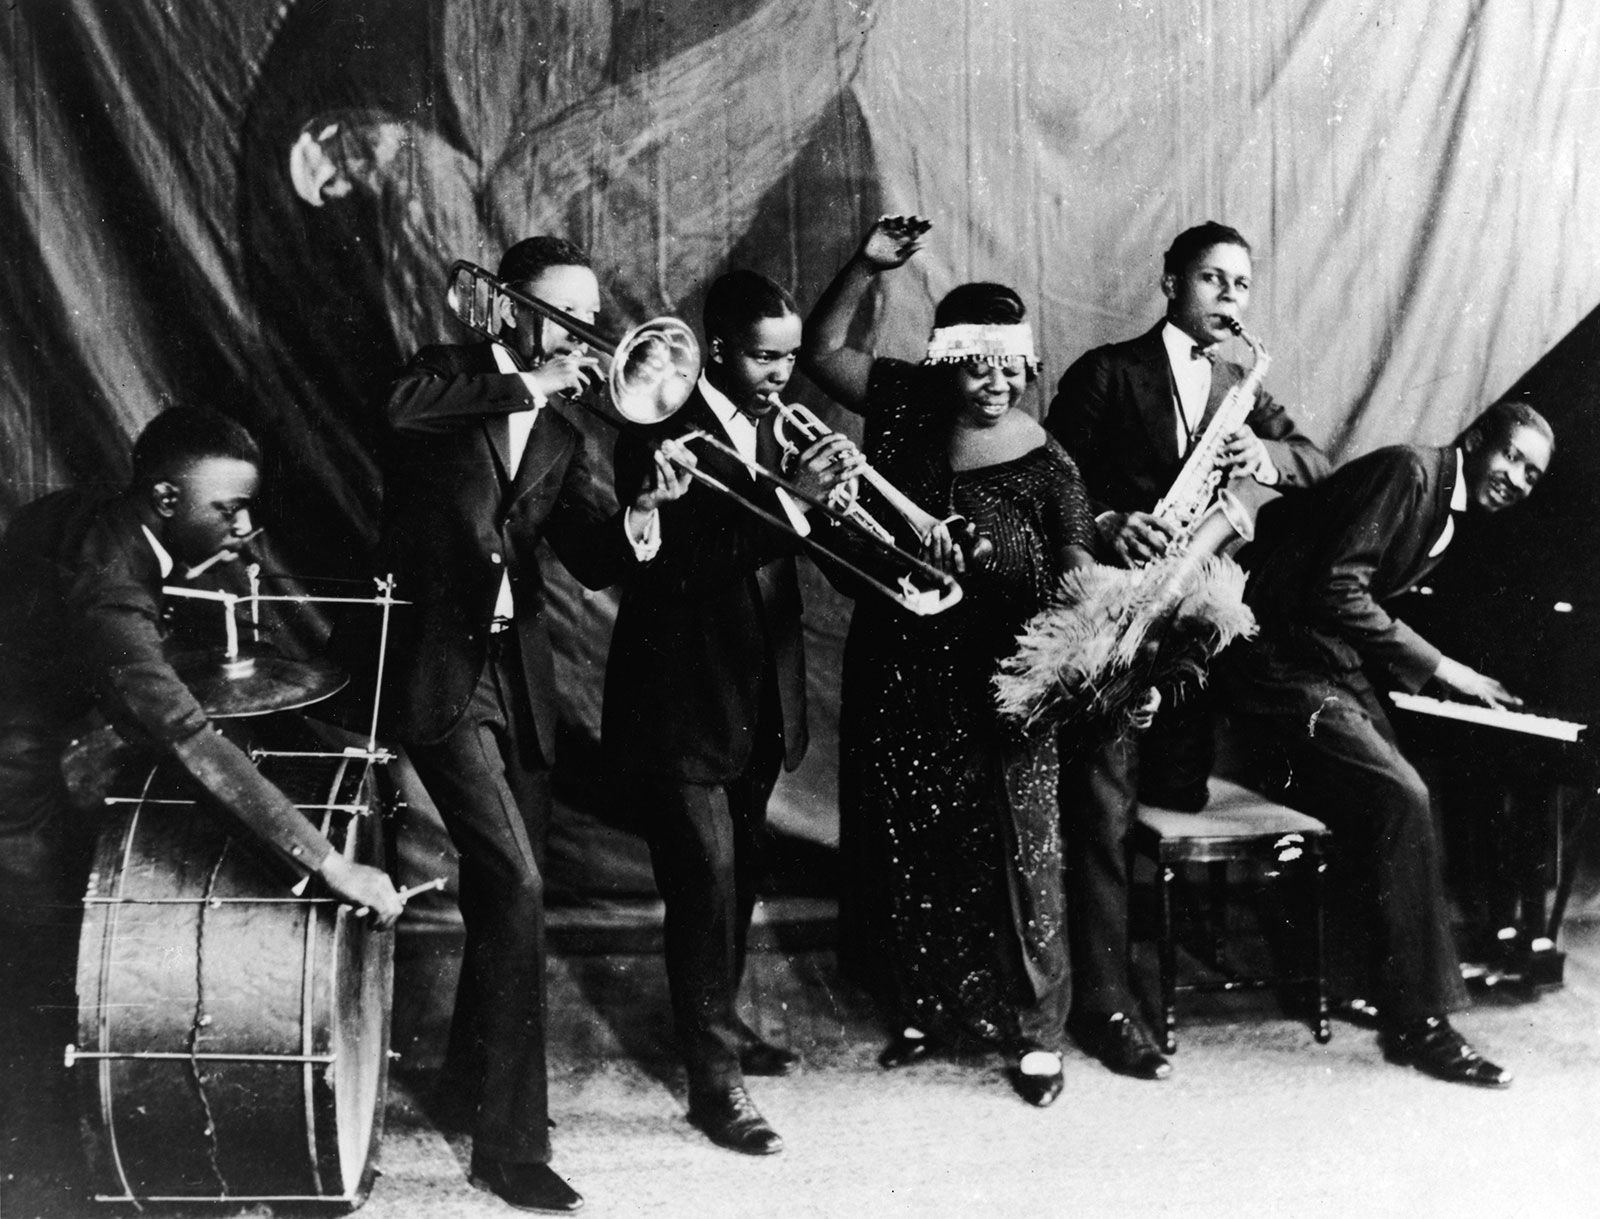 How Did Jazz Music And Blues Music Influence Rock Music?